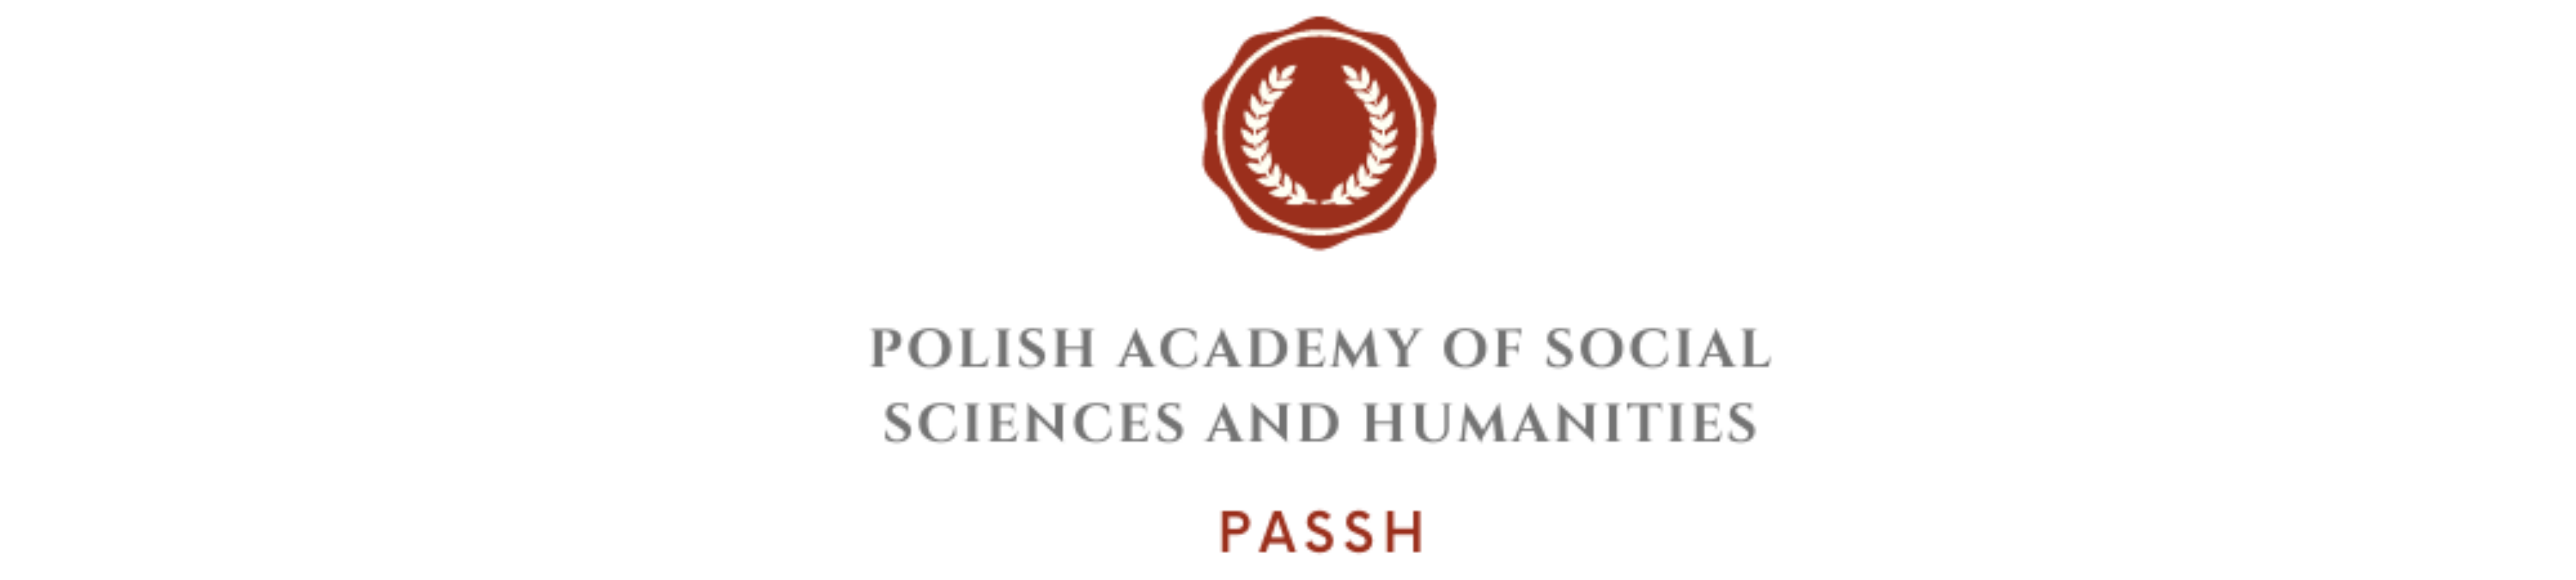 Polish Academy of Social Sciences and Humanities